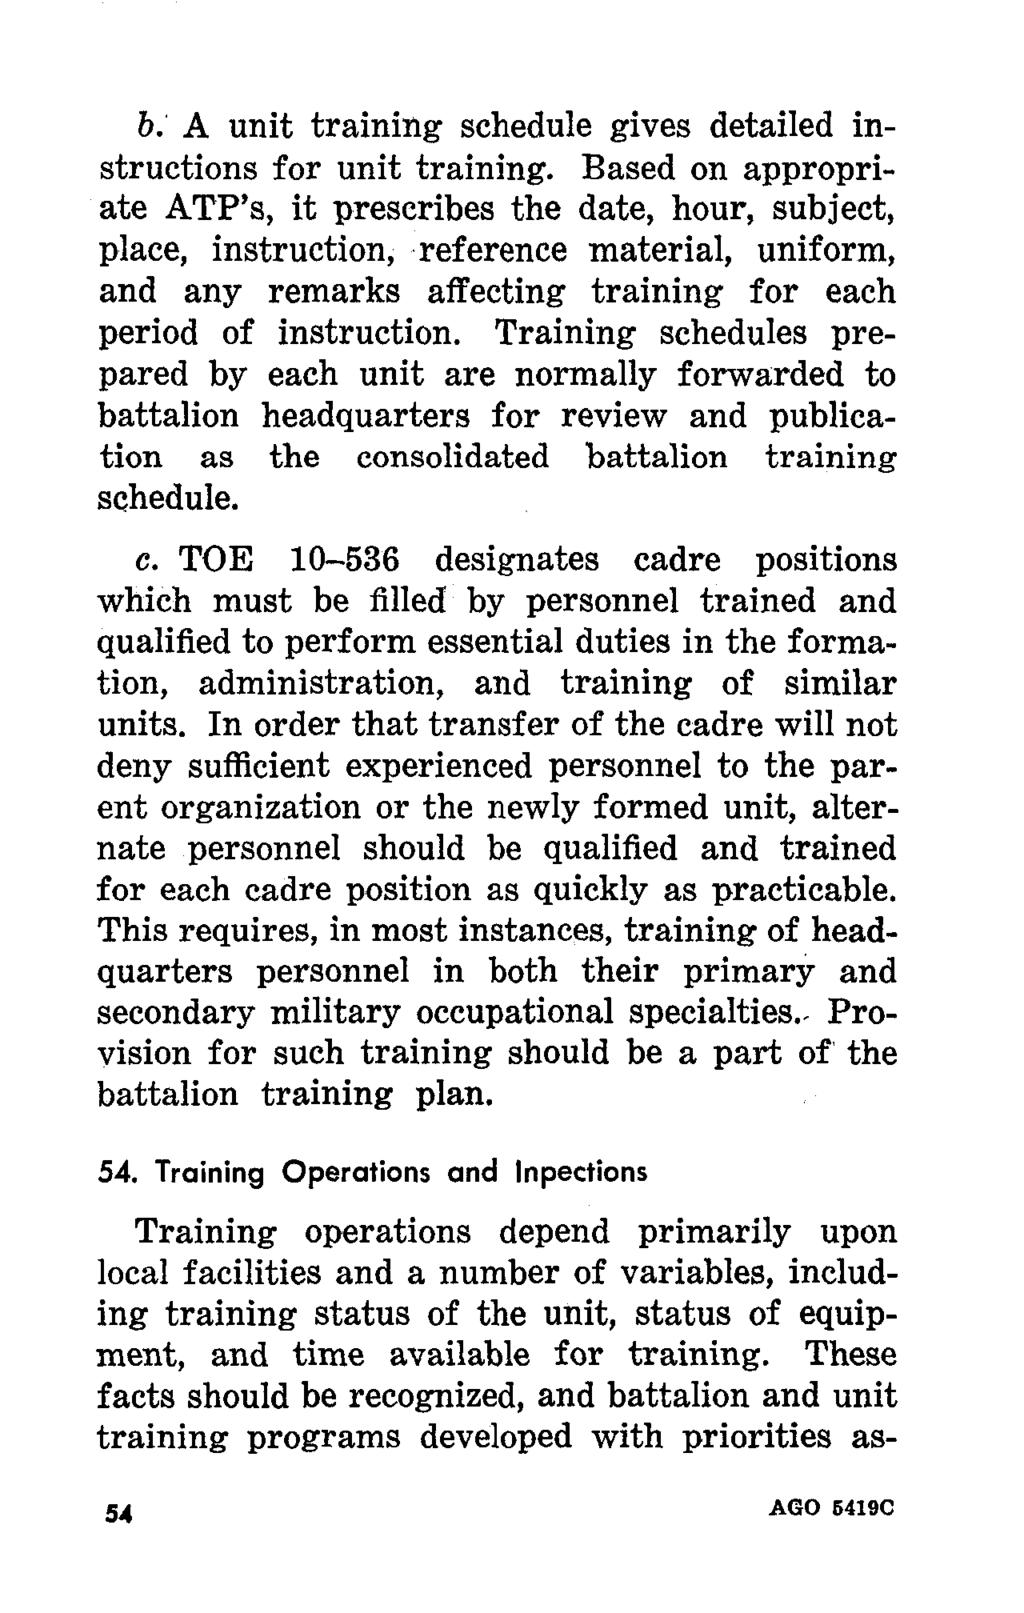 b. A unit training schedule gives detailed instructions for unit training.